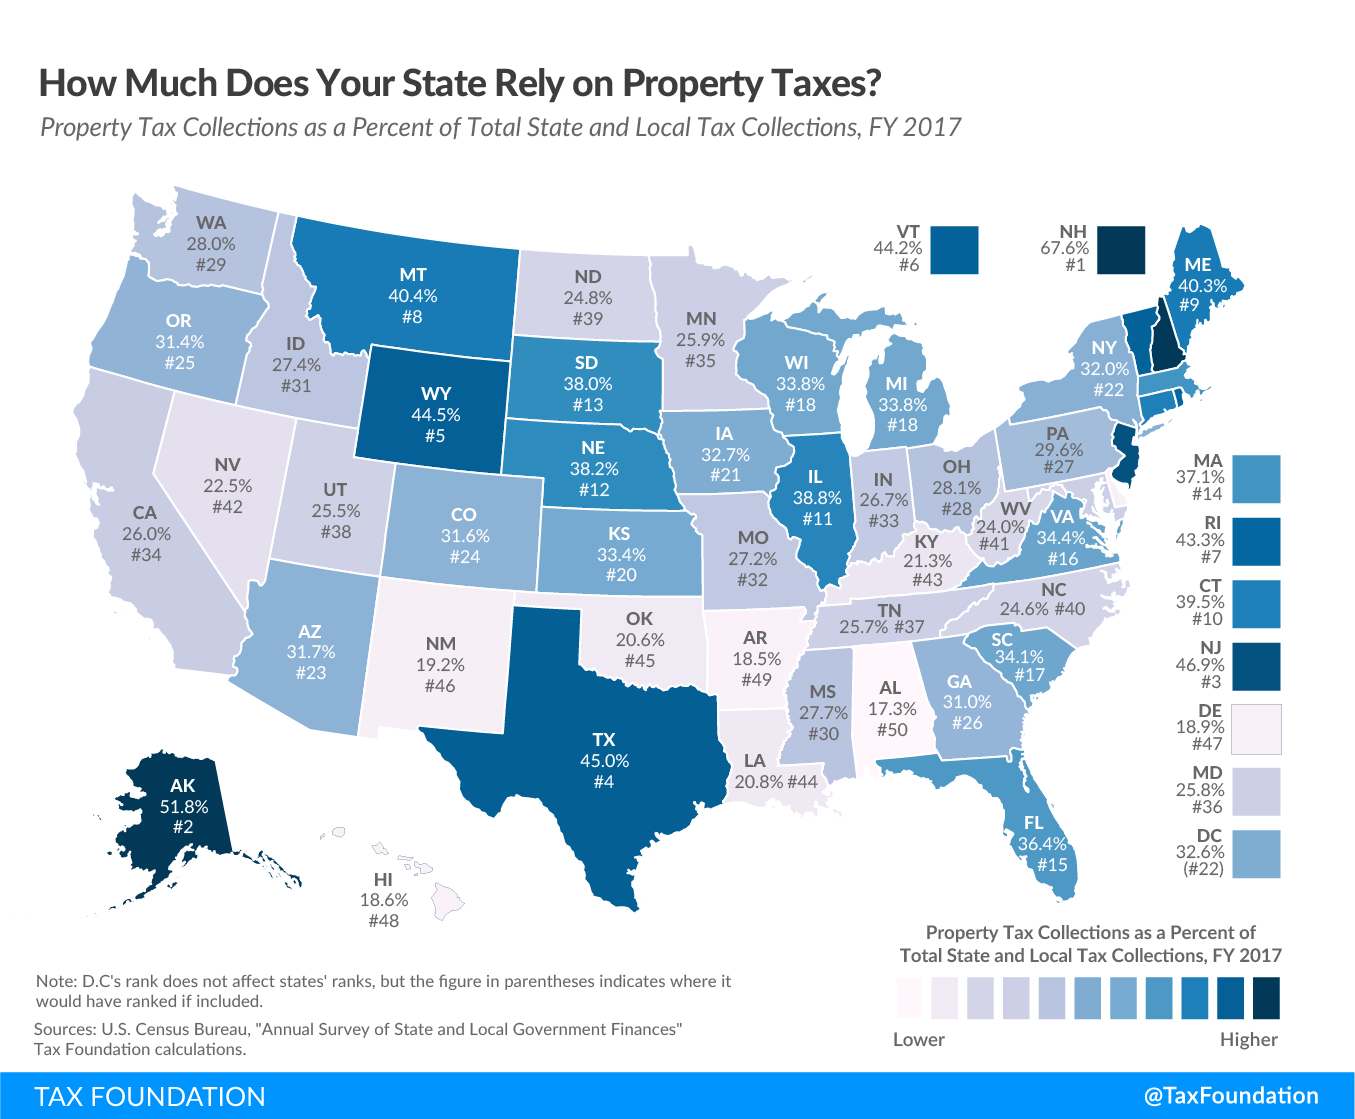 How  much does your state rely on property taxes? state property tax reliance, Property Tax Collections as a Percent of Total State and Local Tax Collections, FY 2017